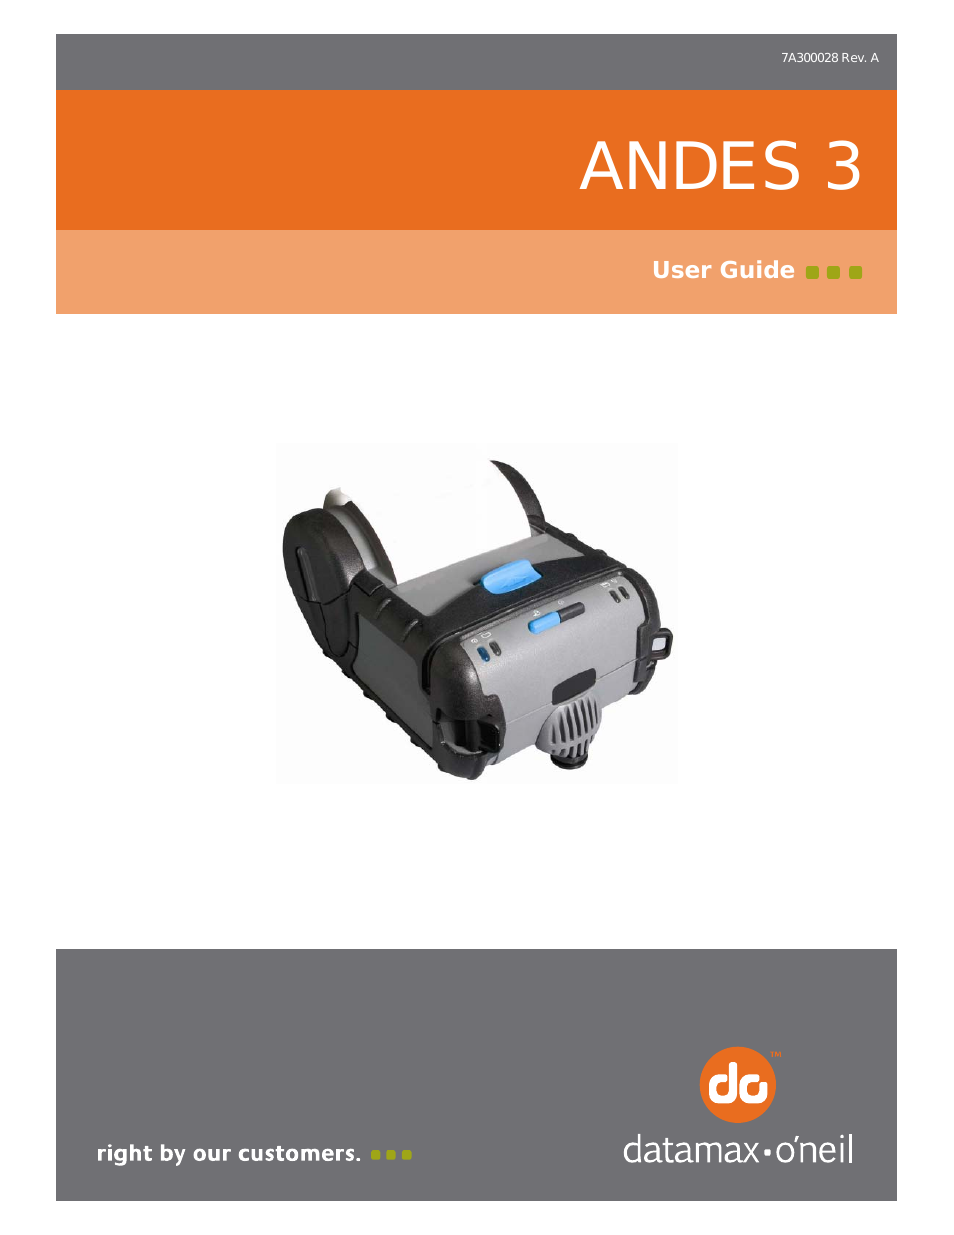 ANDES 3 User Guide